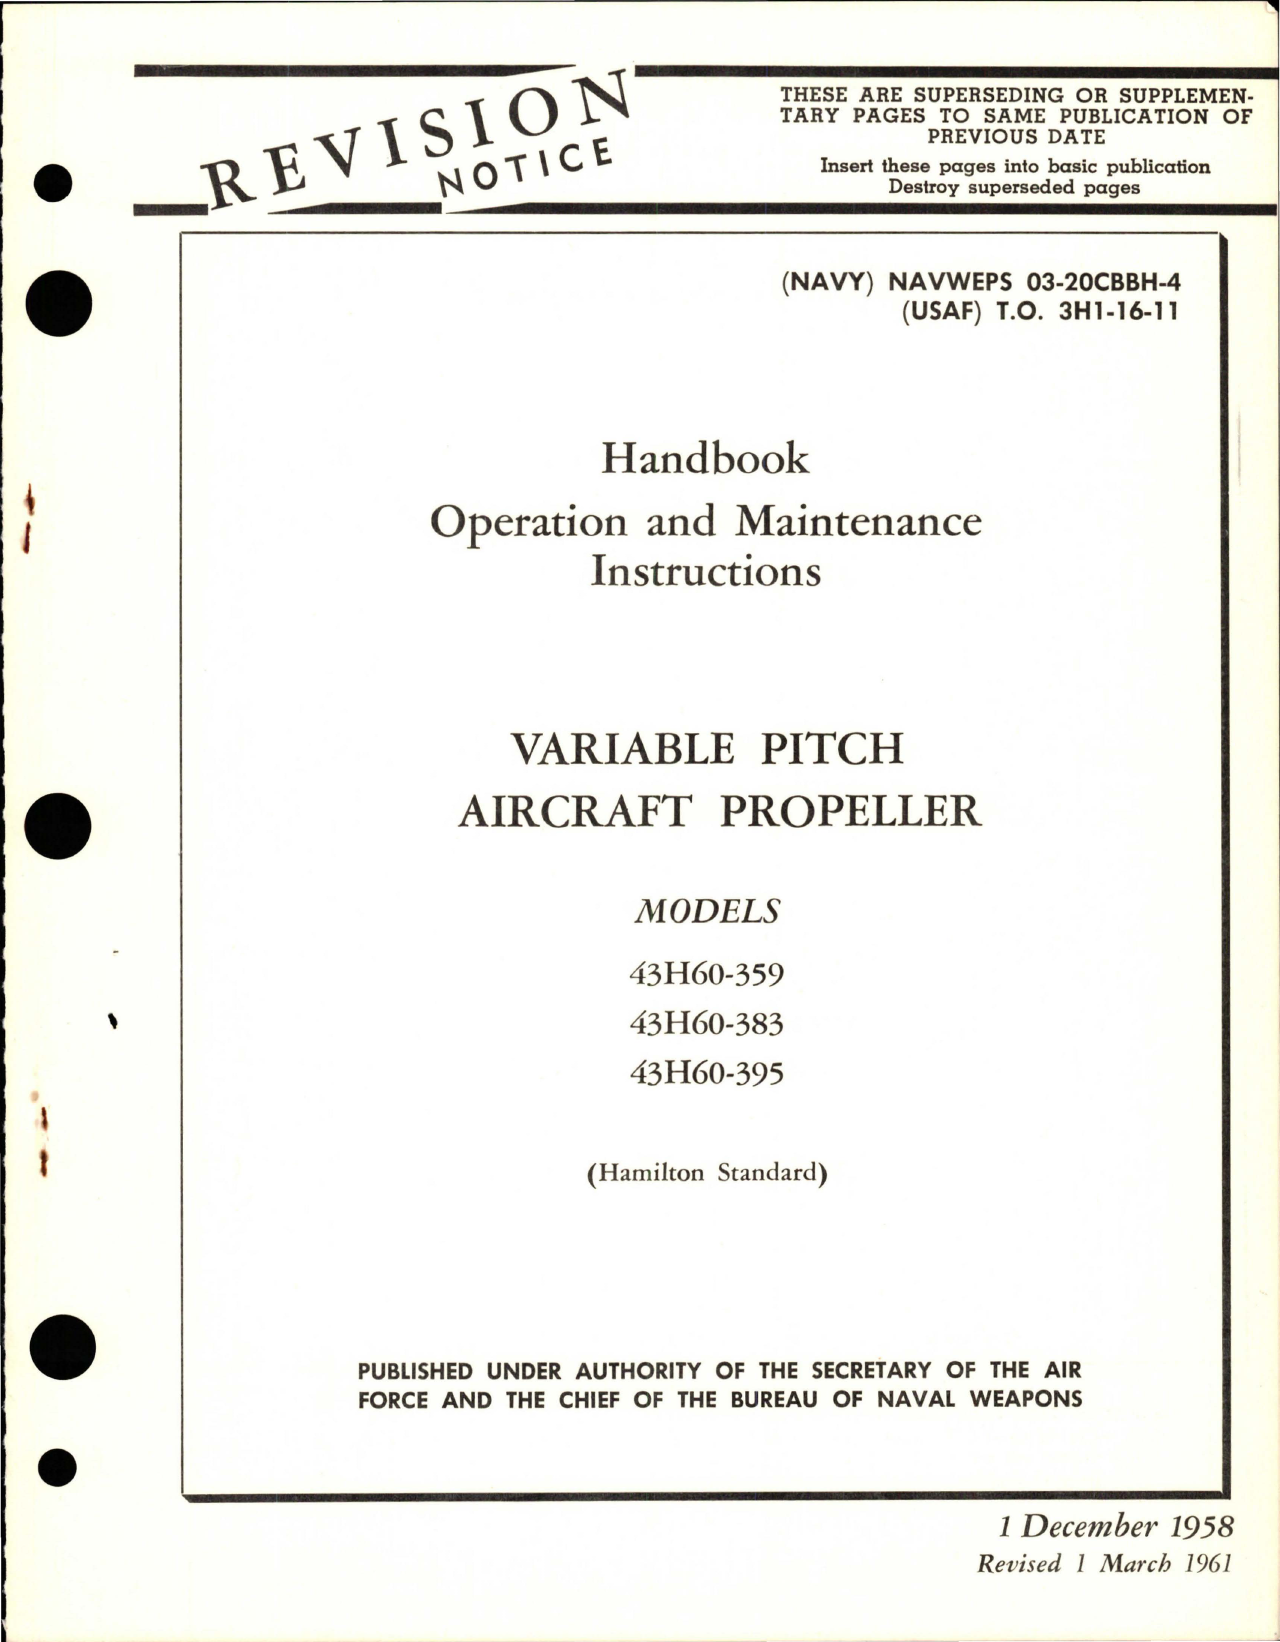 Sample page 1 from AirCorps Library document: Operation and Maintenance Instructions for Variable Pitch Propeller - Models 43H60-359, 43H60-383 and 43H60-395 